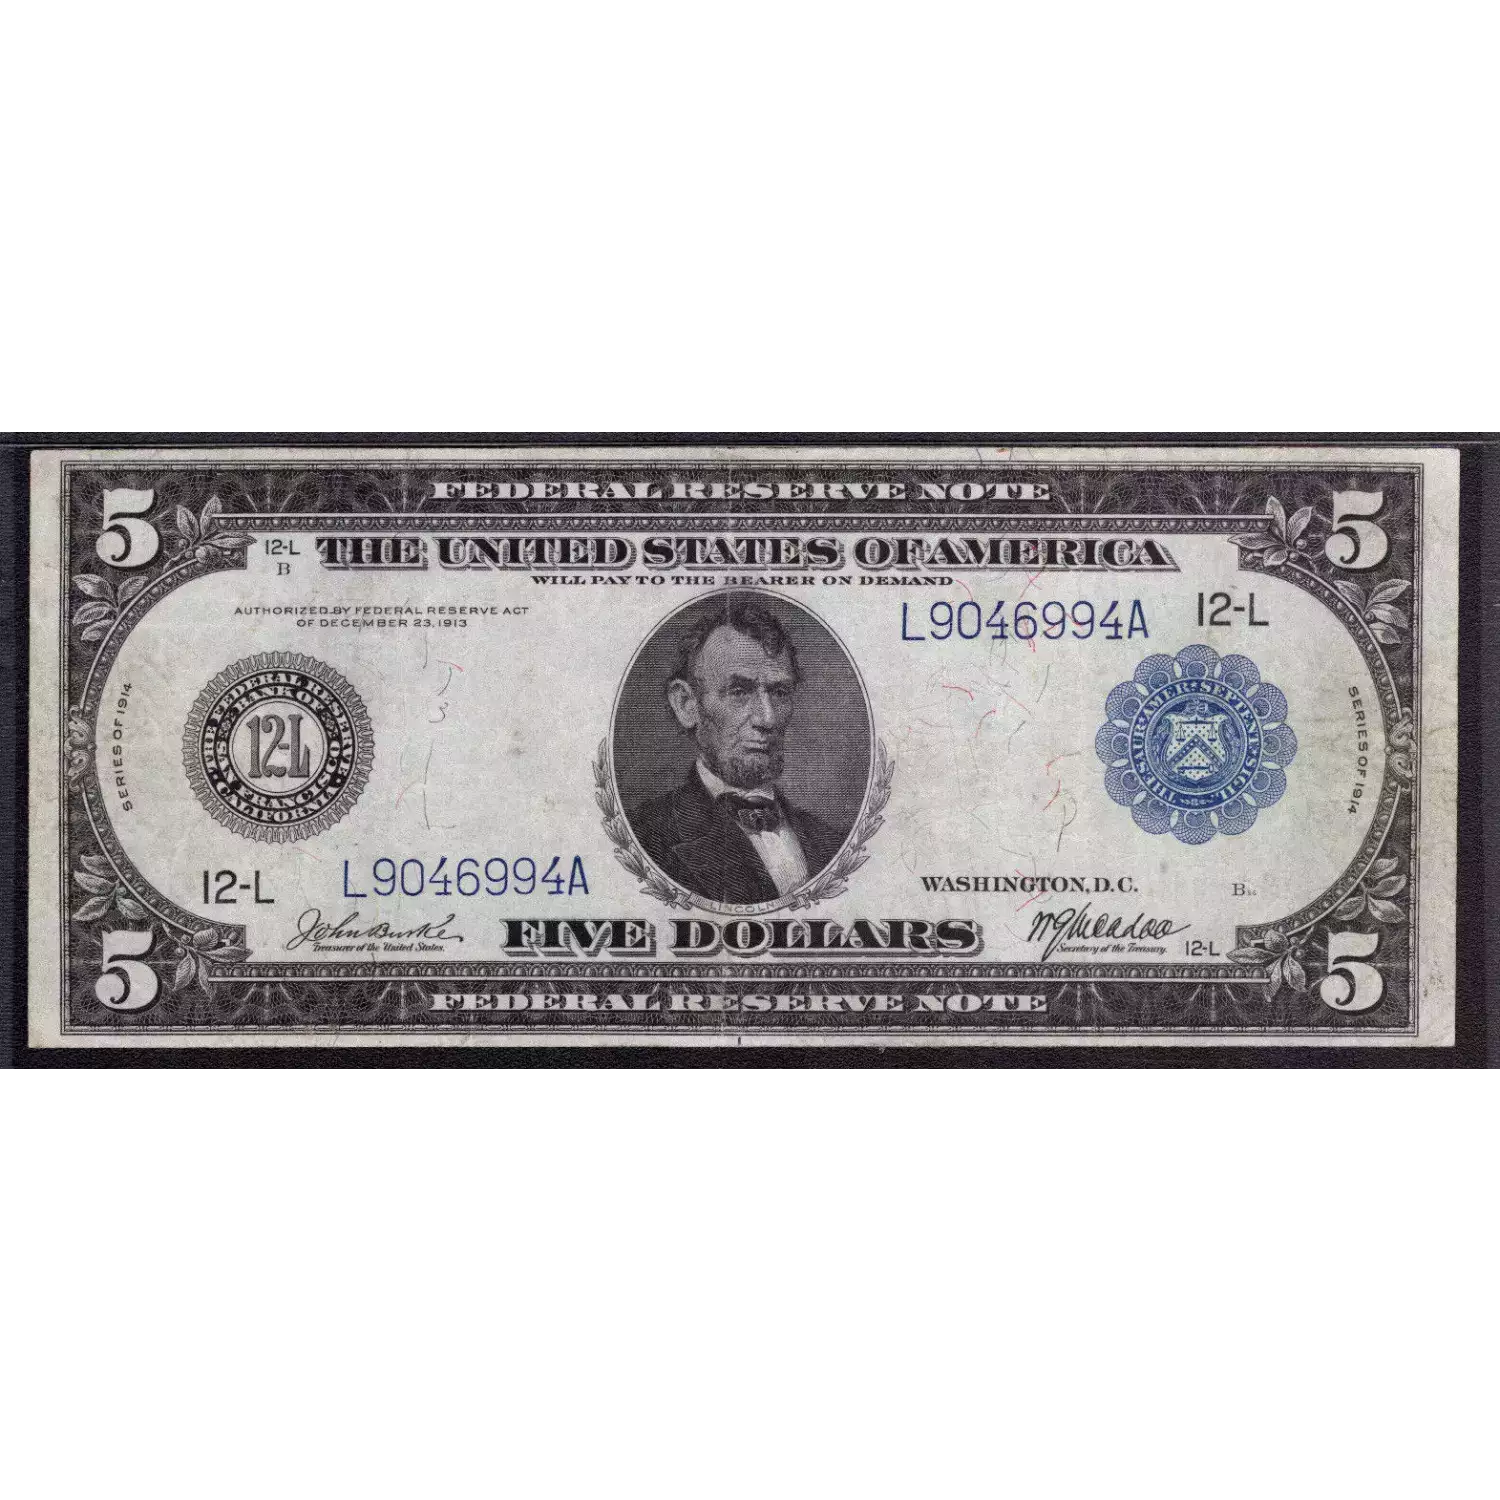 $5 1914 Red Seal Federal Reserve Notes 888 (3)